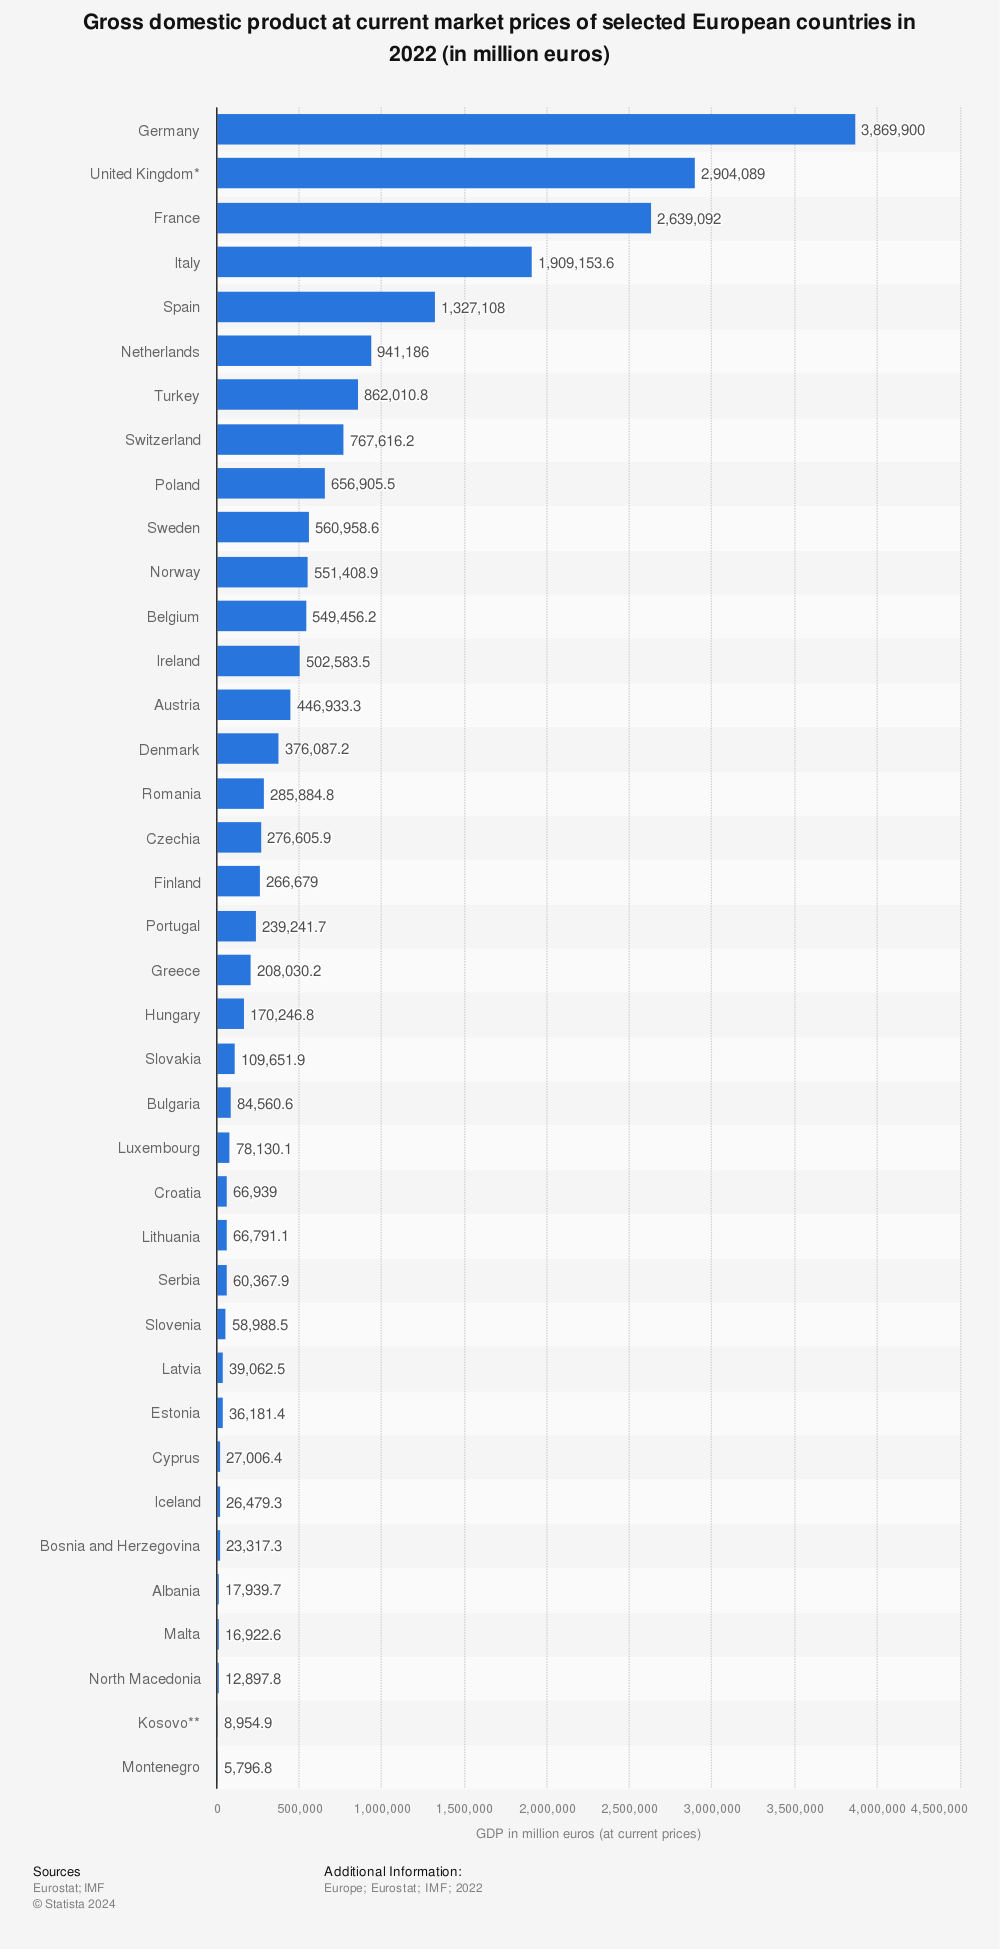 Statistic: Gross domestic product at current market prices of selected European countries in 2022 (in million euros) | Statista